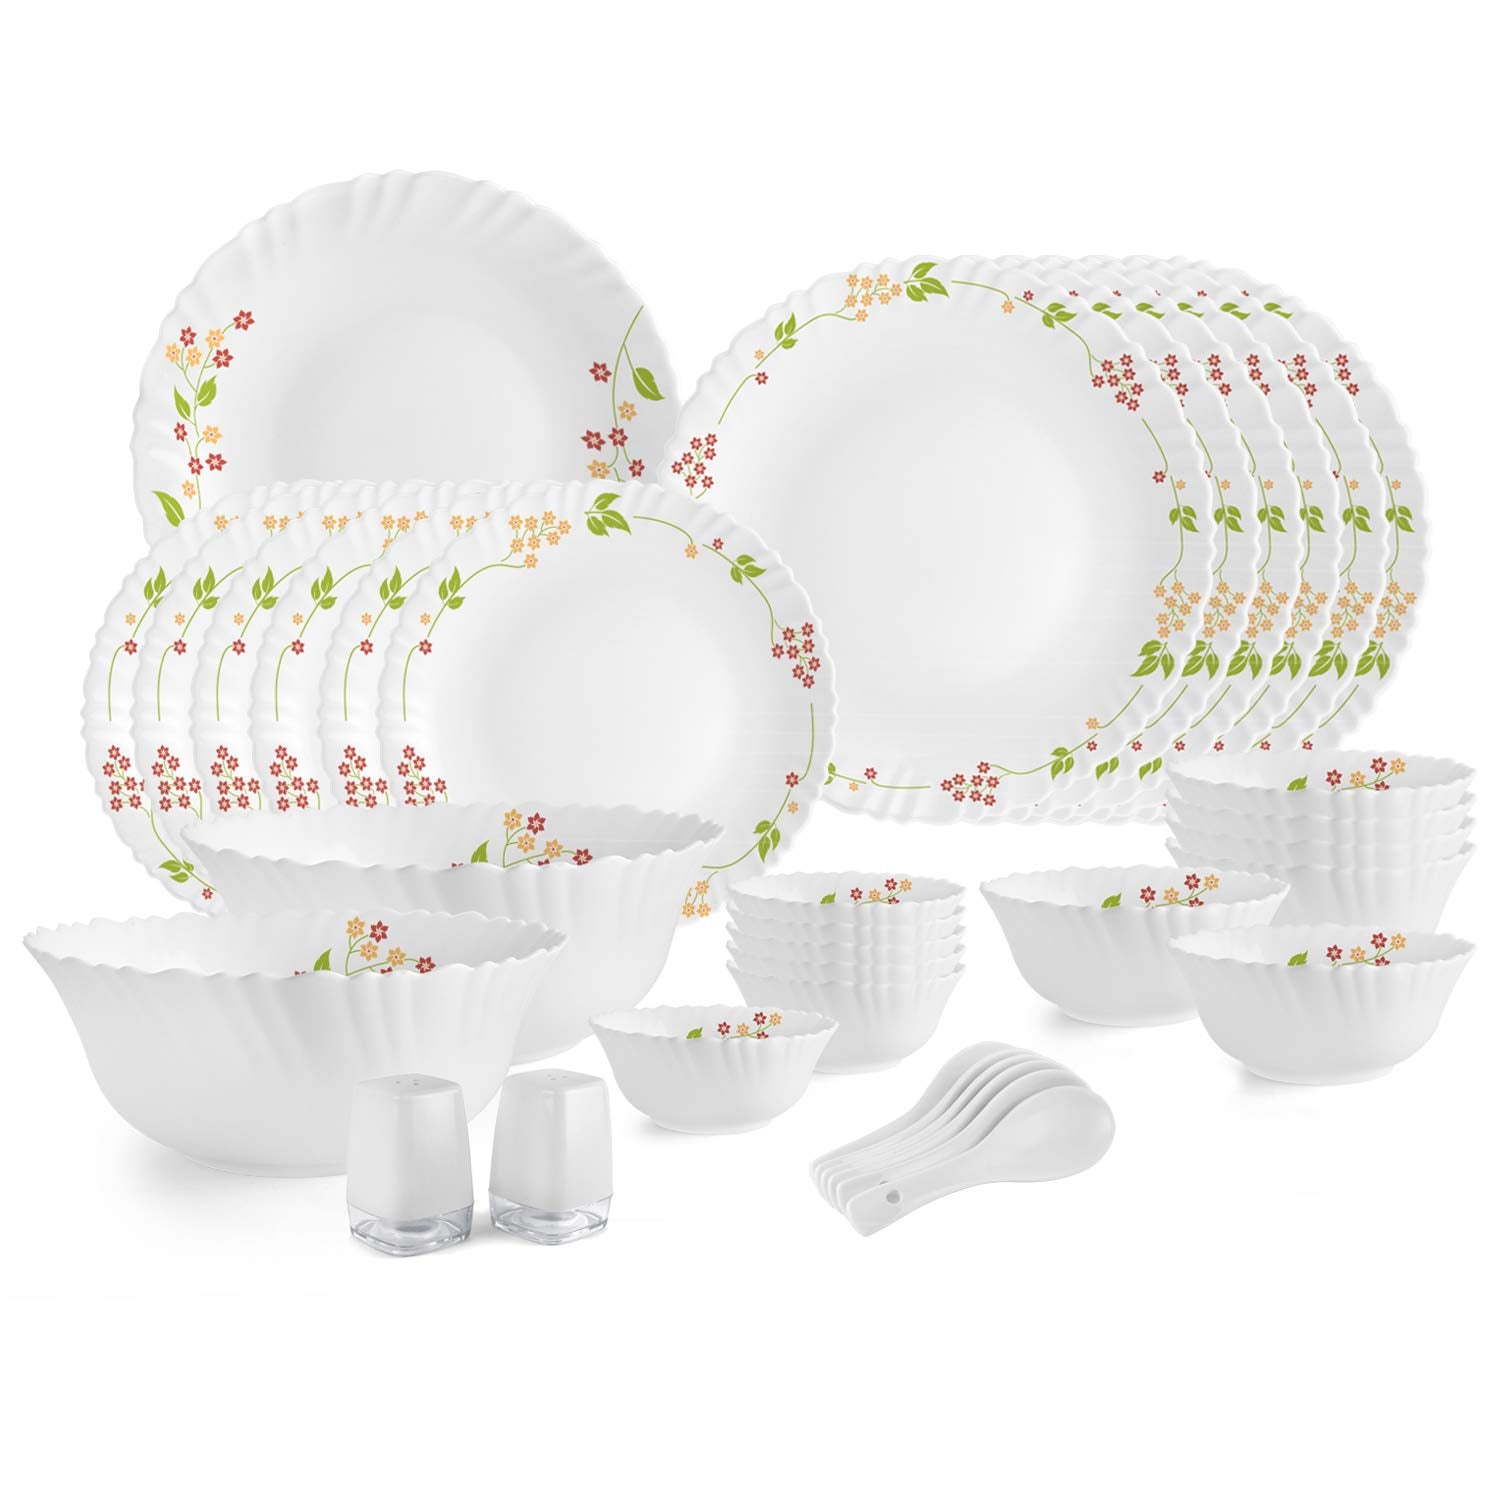 Dazzle Series 35 Pieces Opalware Dinner Set for Family of 6 Secret Garden / With Rice Platter